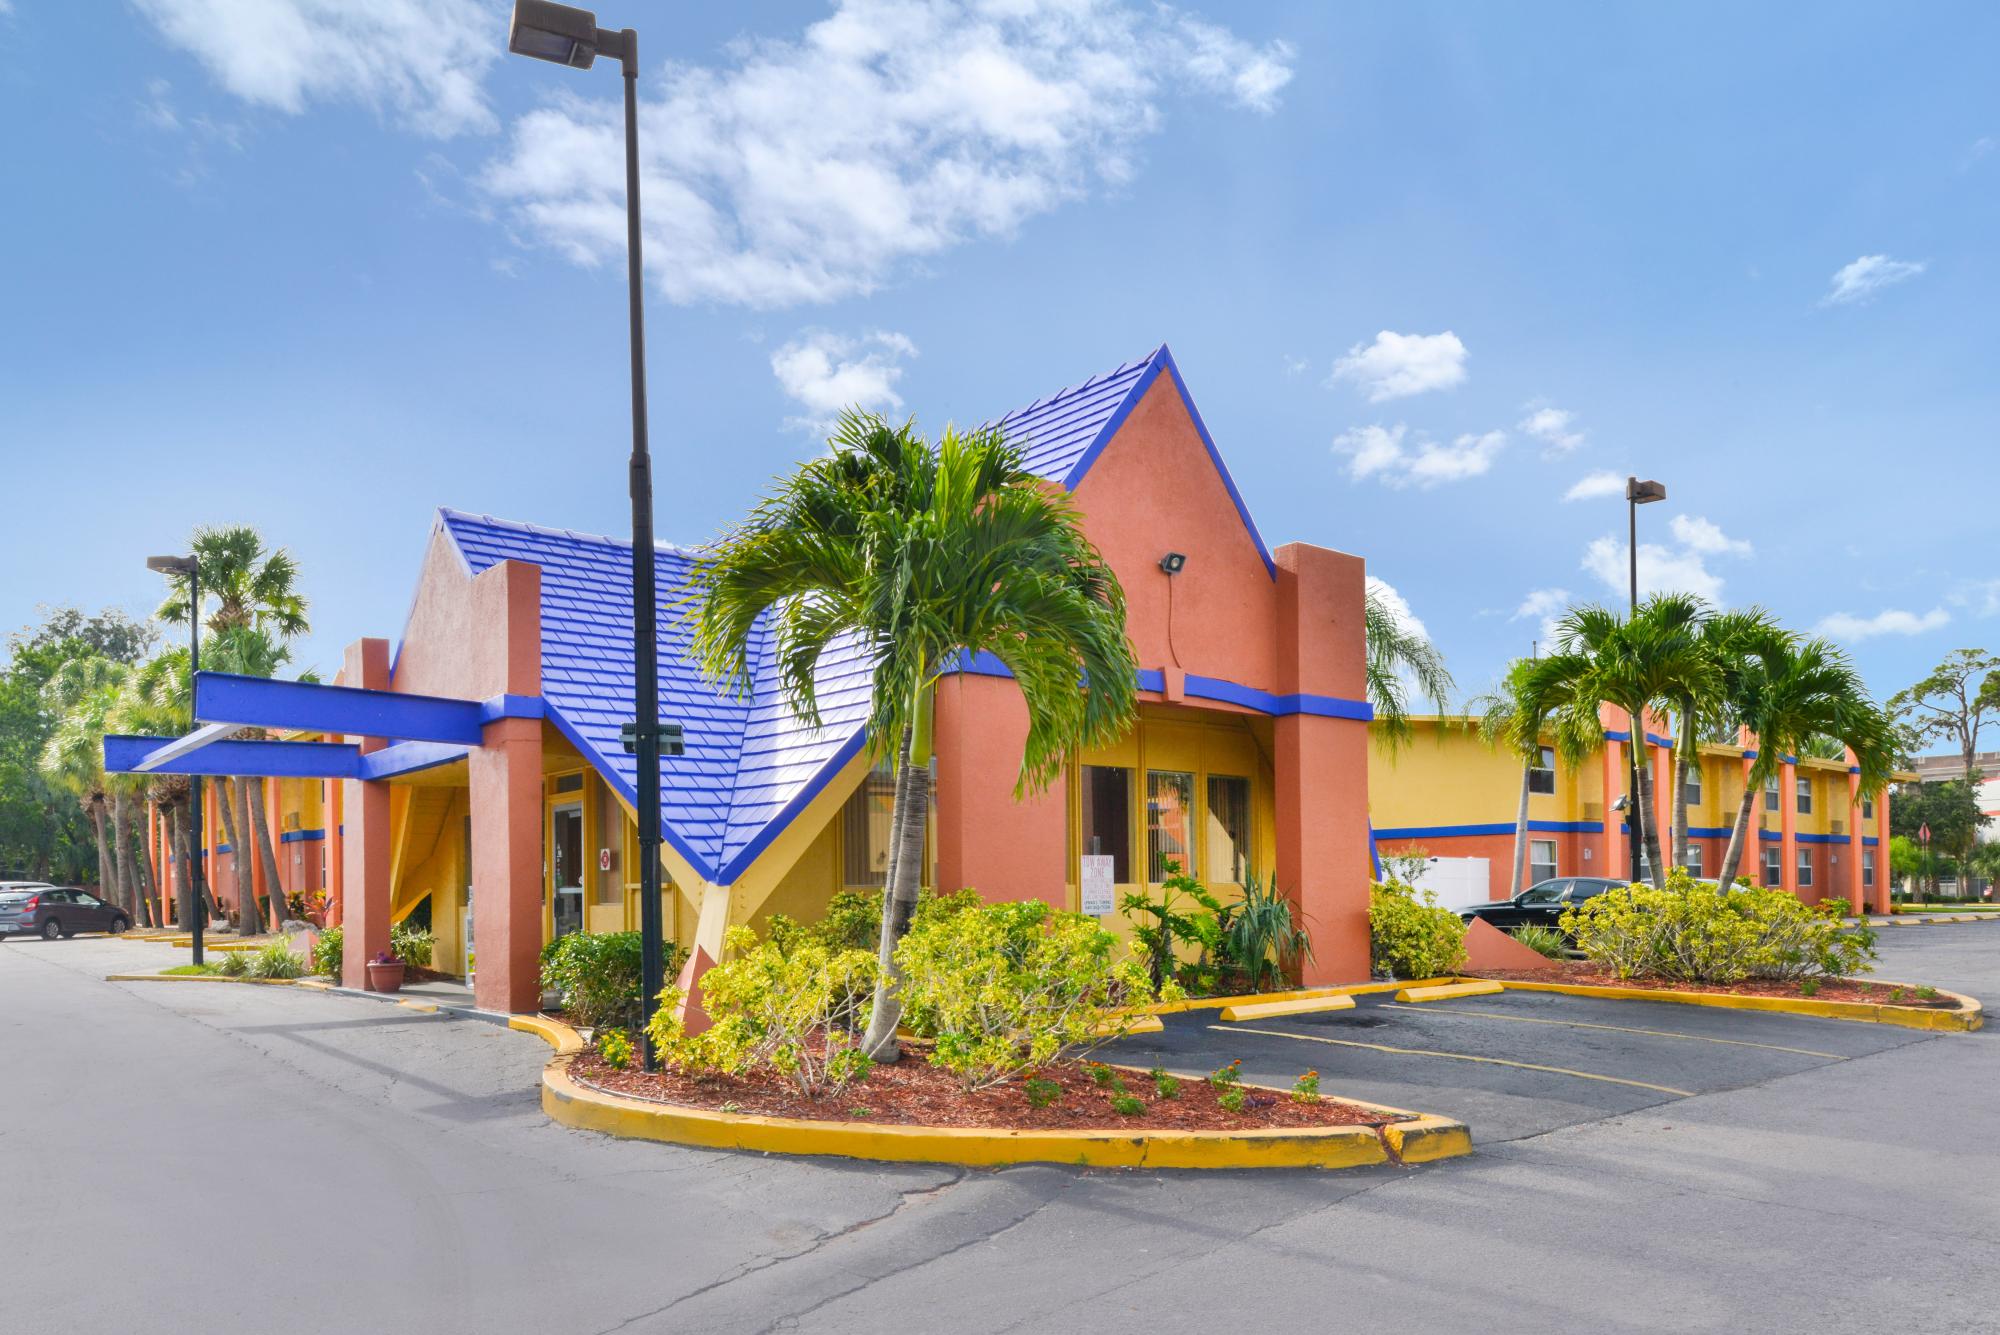 Entry exterior with palm trees and parking